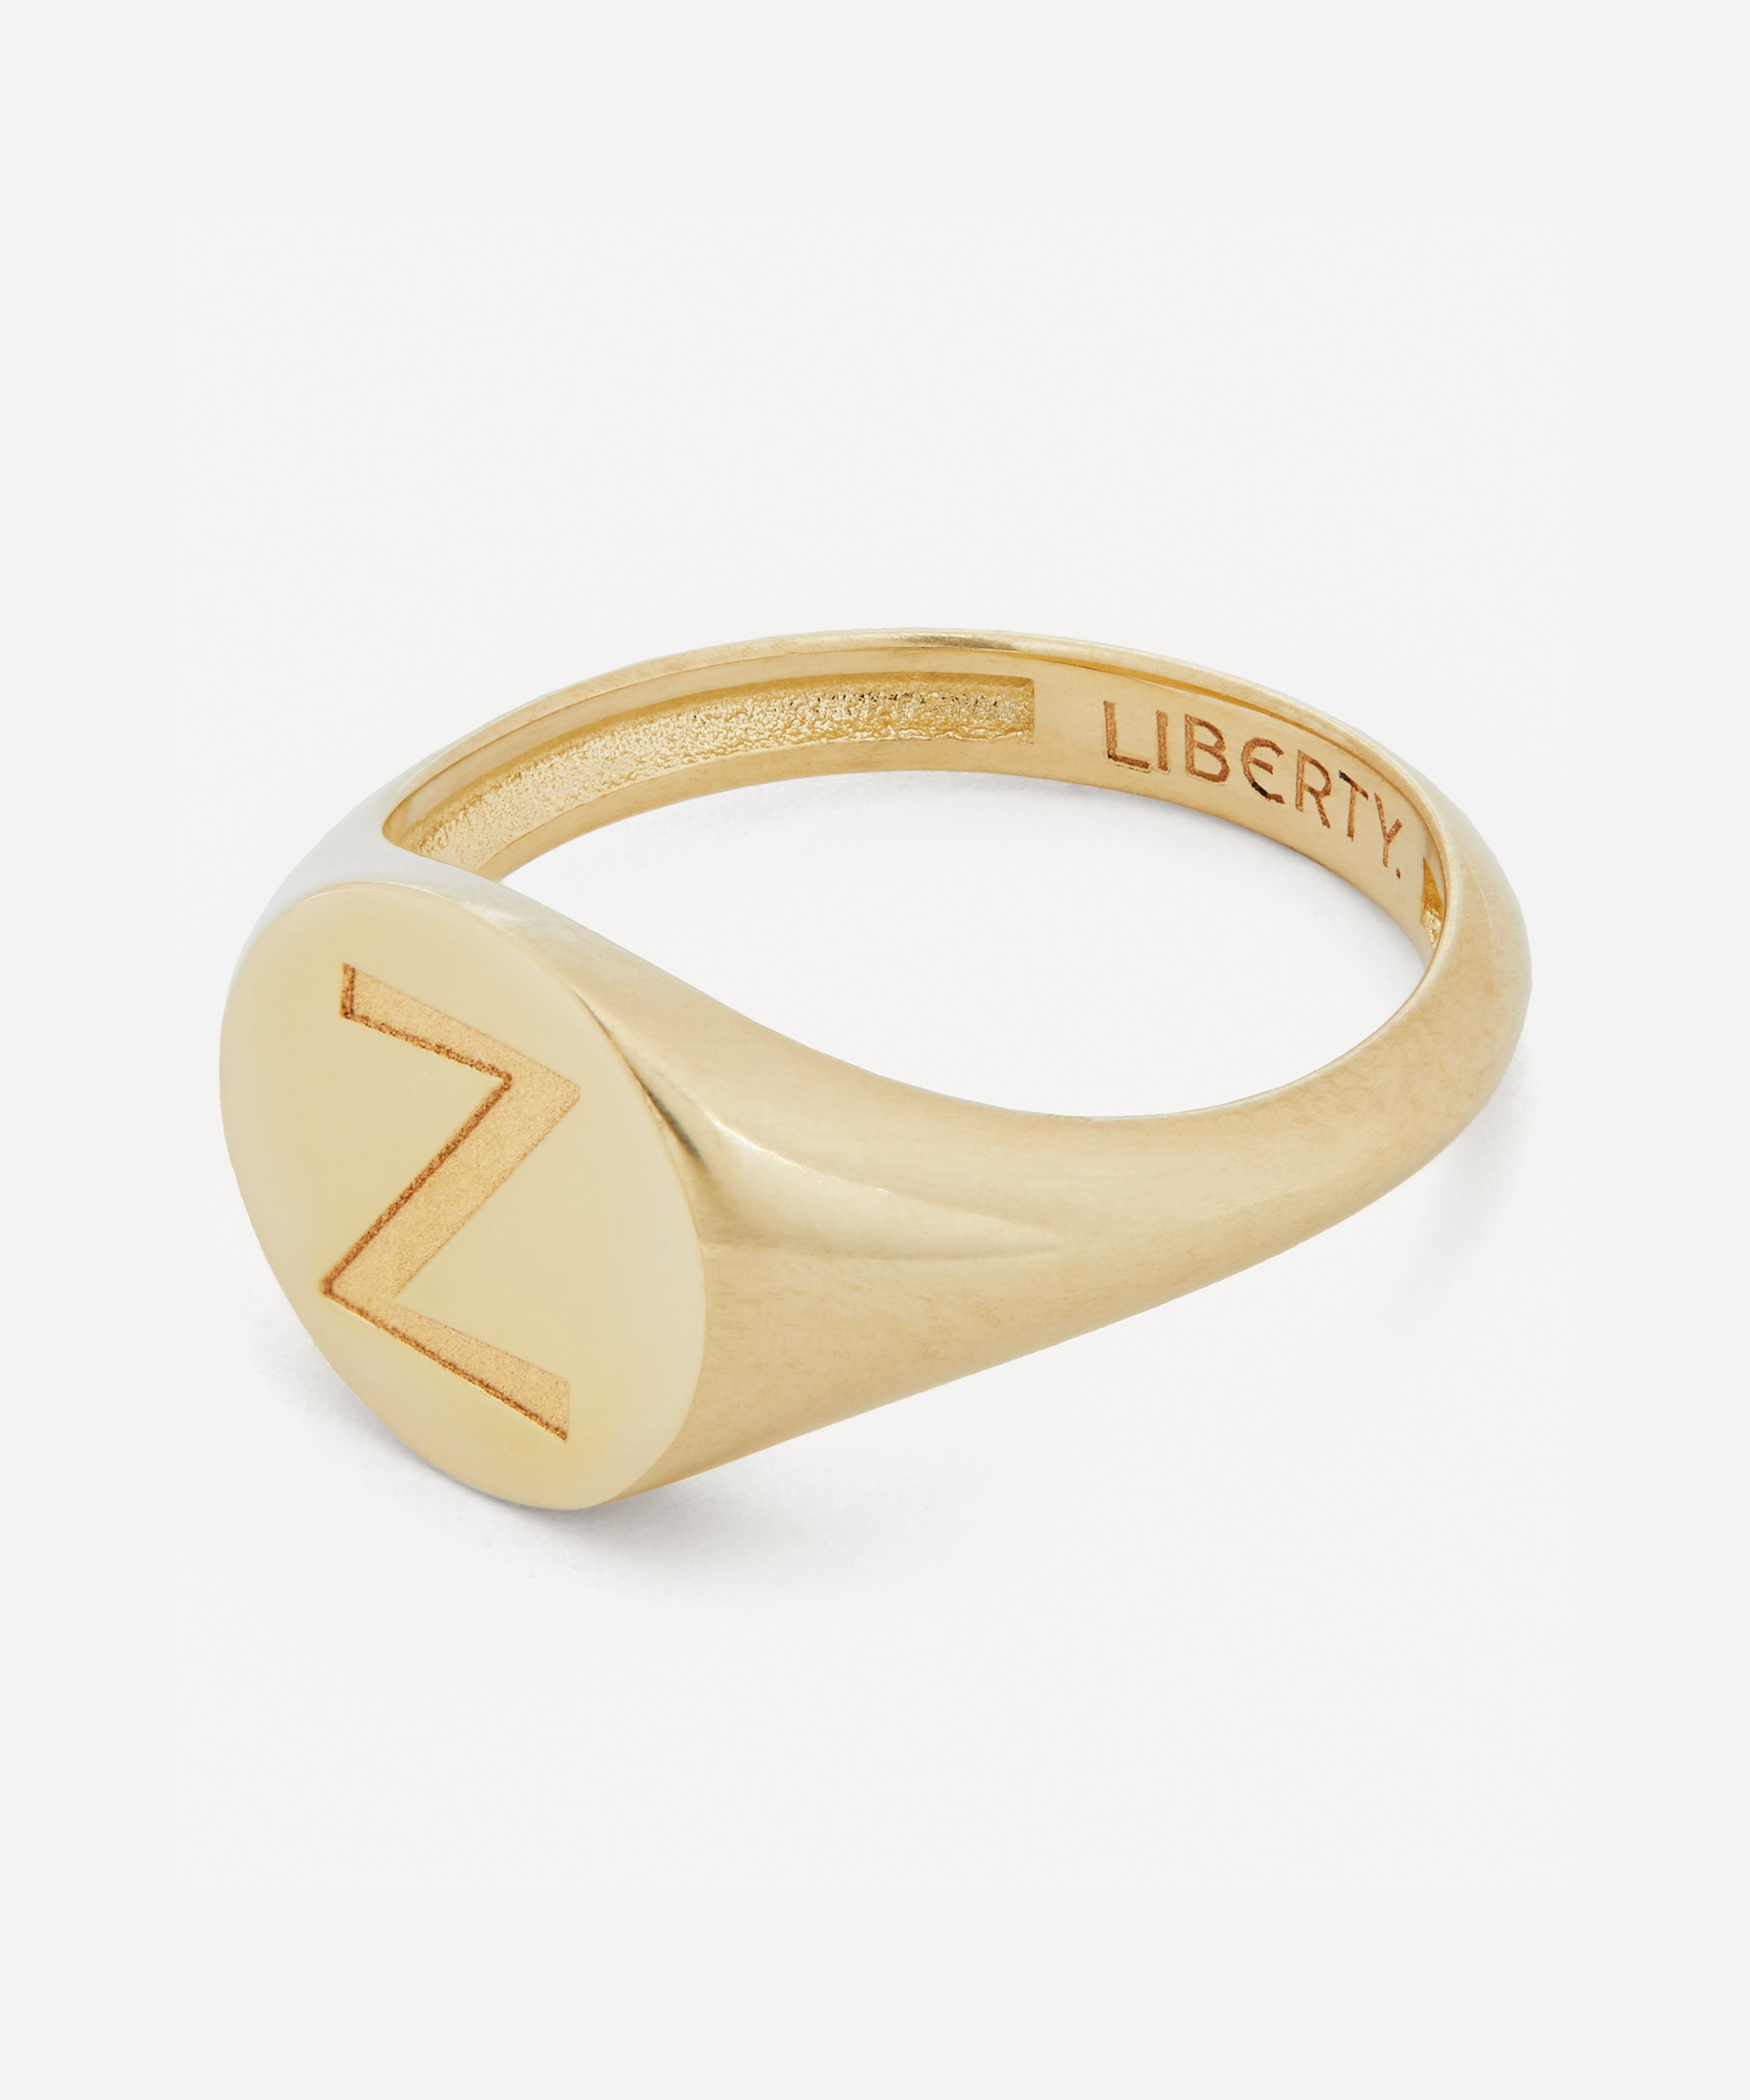 9ct Gold Initial Liberty Signet Ring